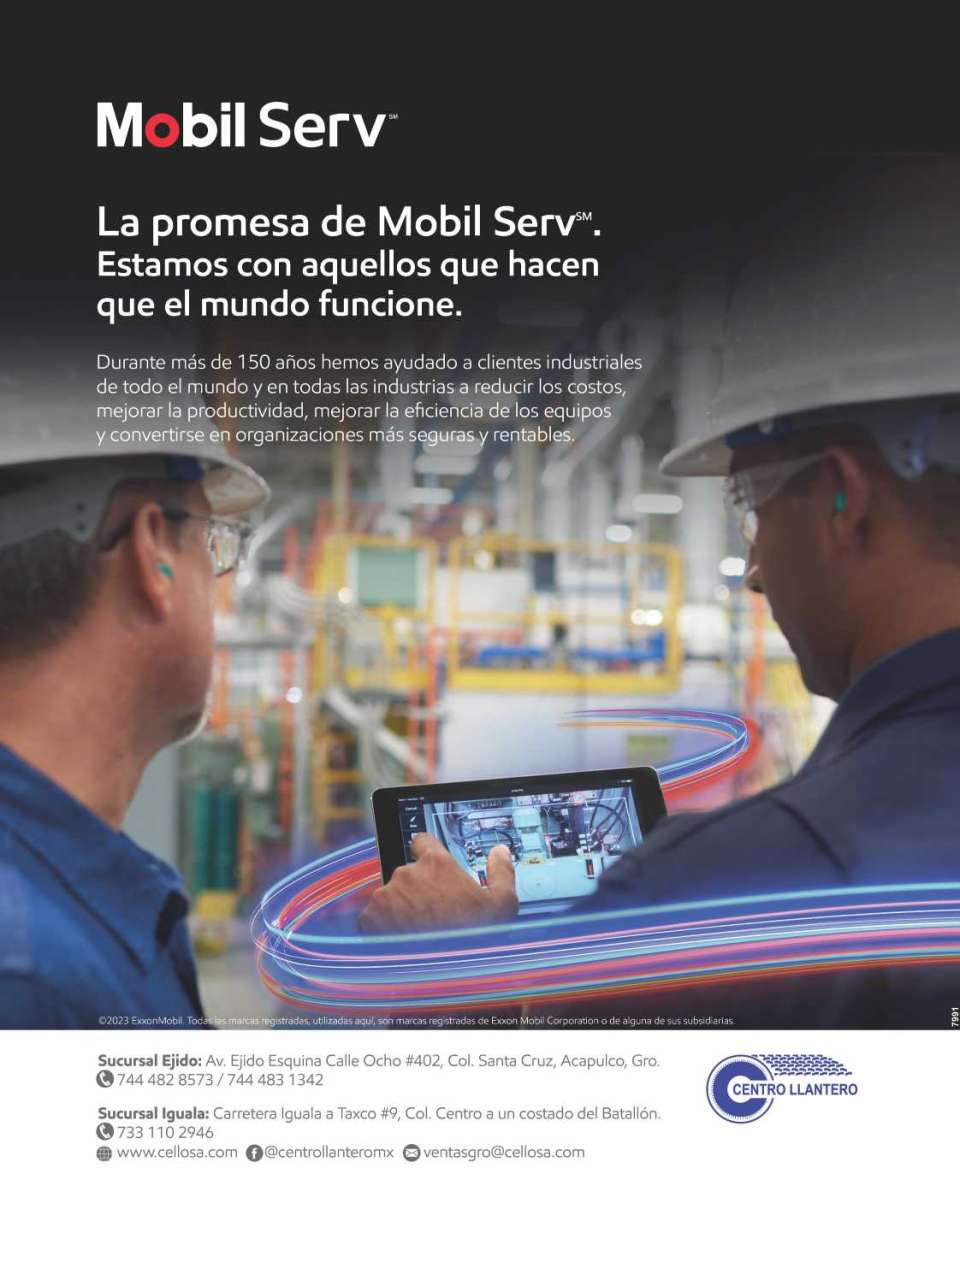 Mobil Serv Lubricants Industrial Lubricants, for Heavy Equipment and Automotive. Experts in lubrication and monitoring systems.